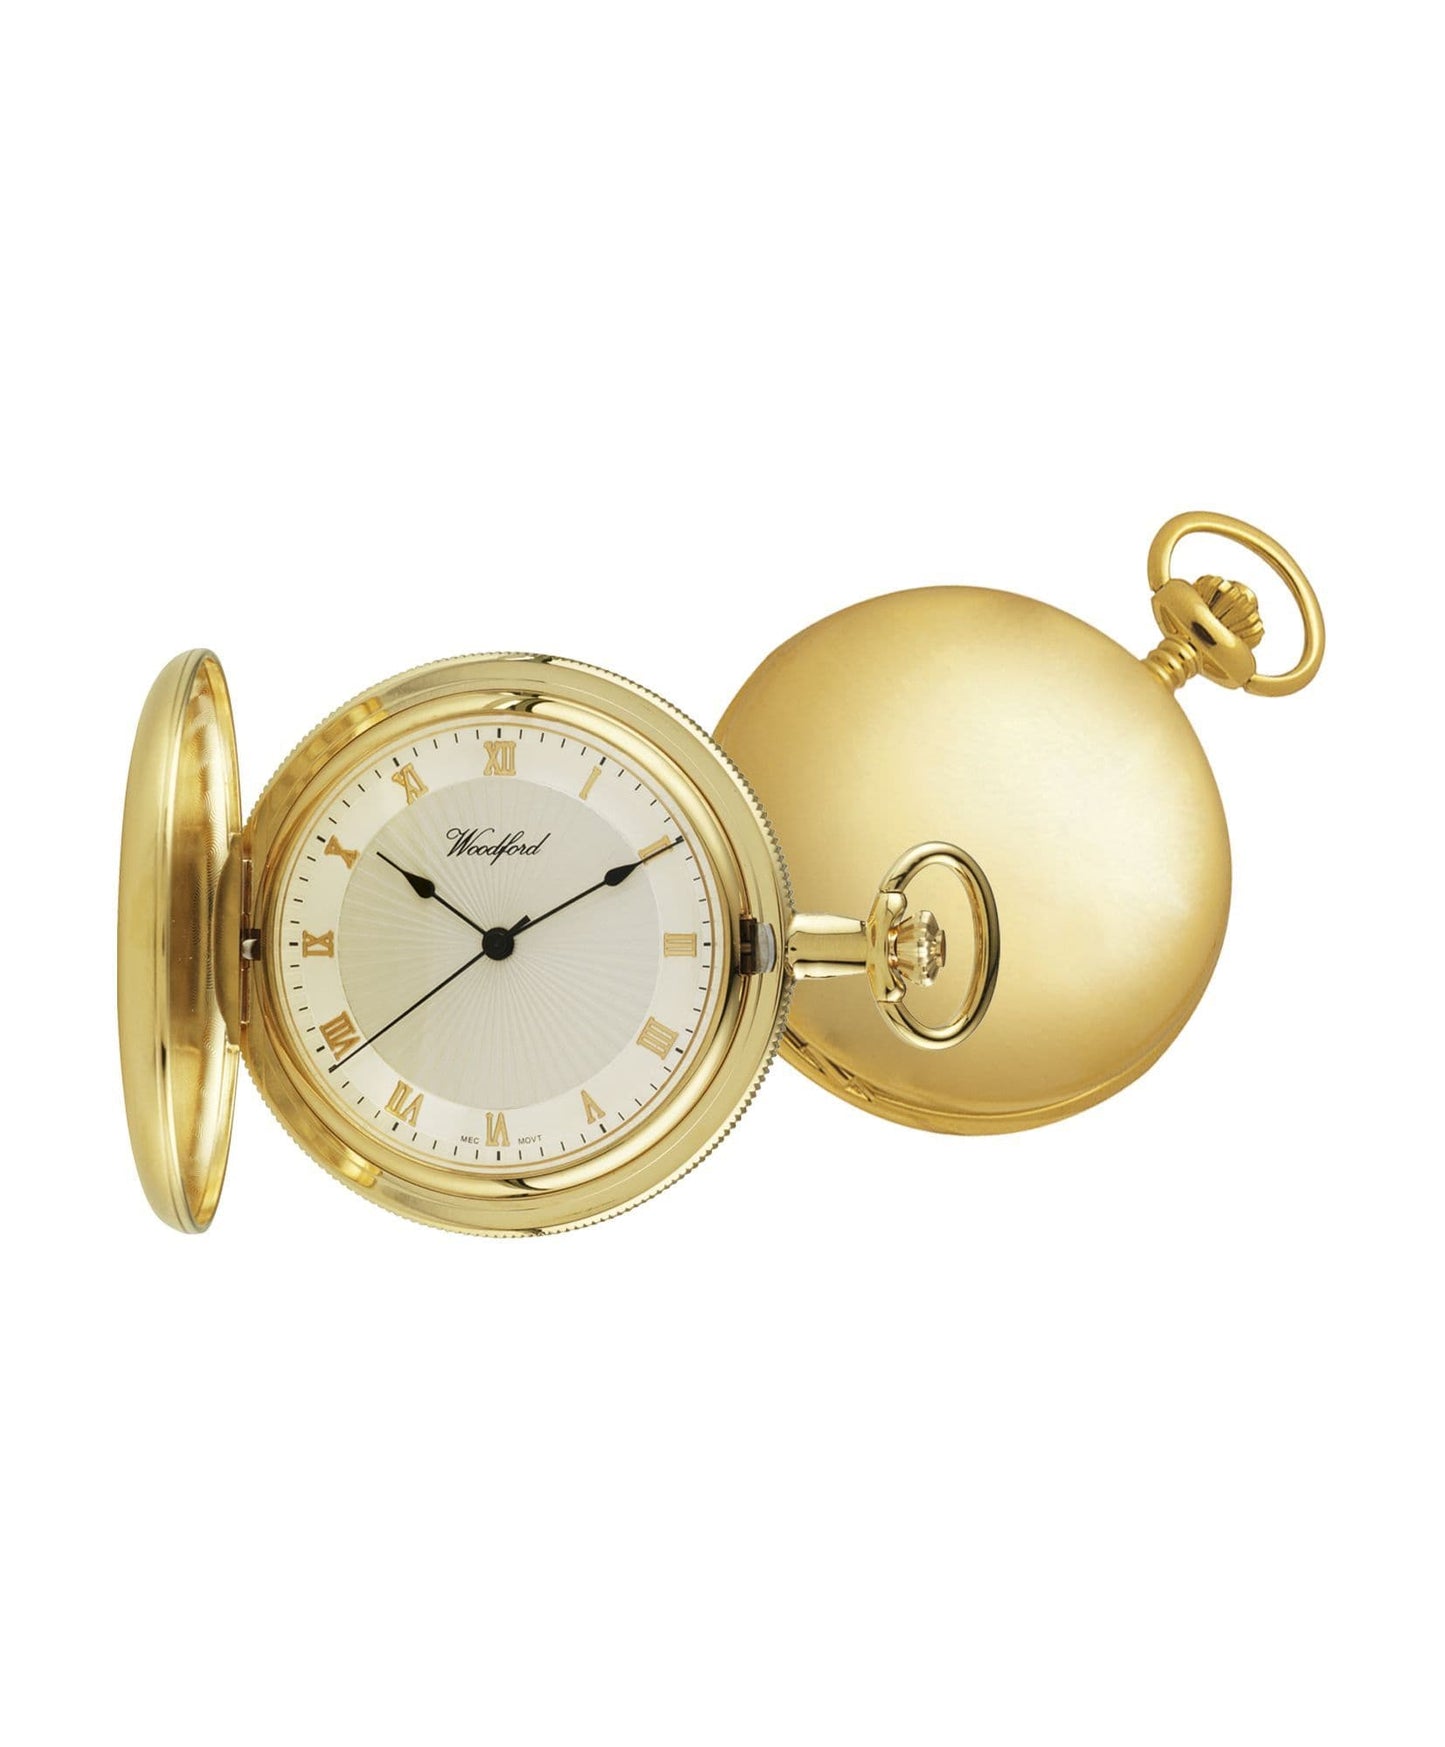 Mechanical Gold Plated Plain Pocket Watch With Chain